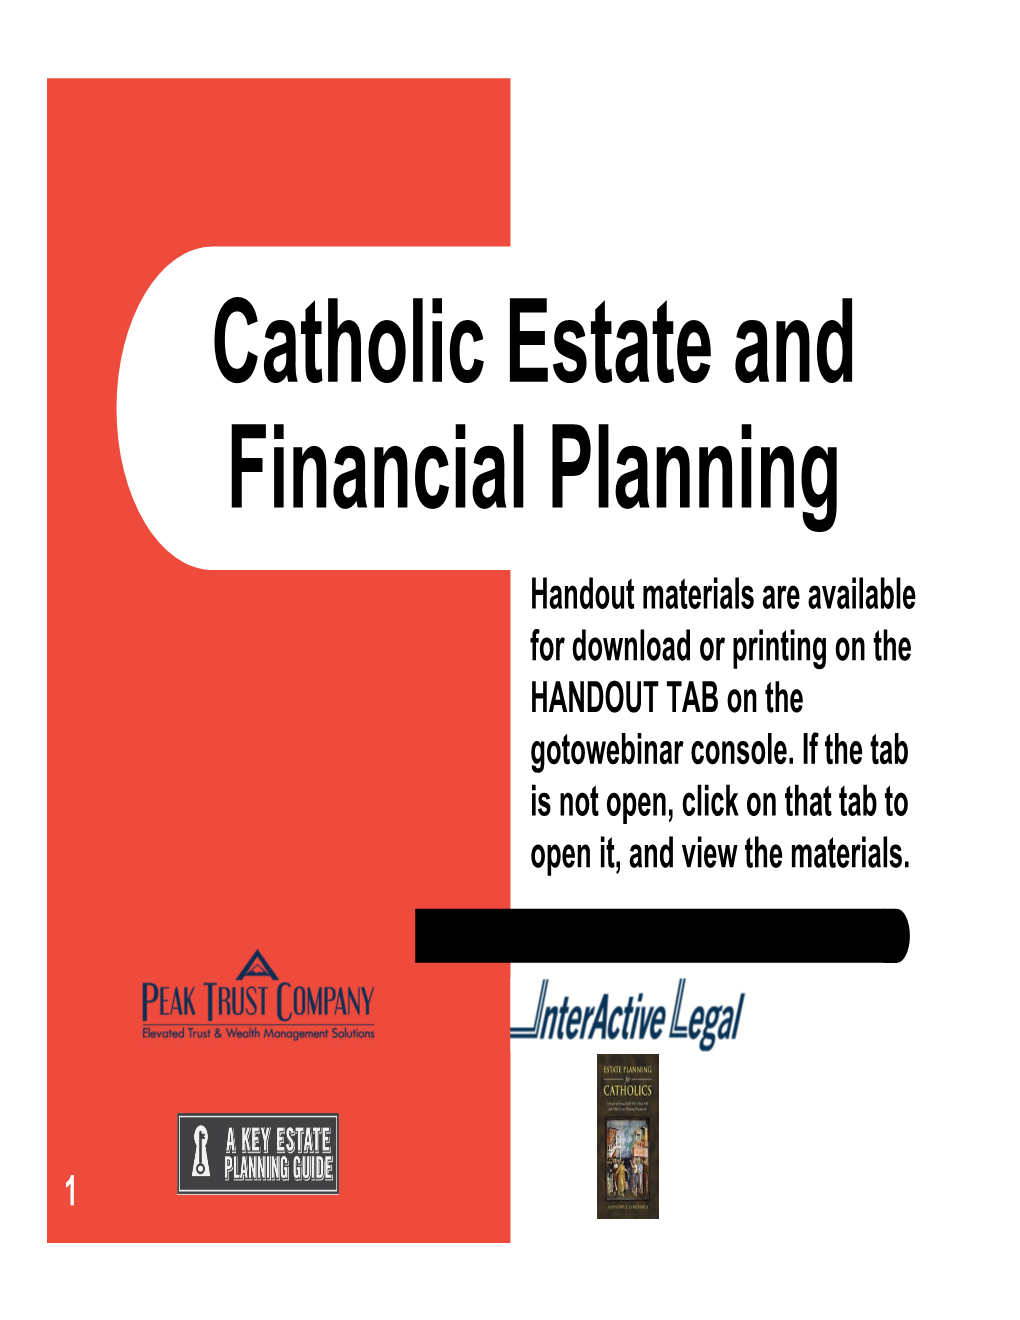 Catholic Estate and Financial Planning Handout Materials Are Available for Download Or Printing on the HANDOUT TAB on the Gotowebinar Console